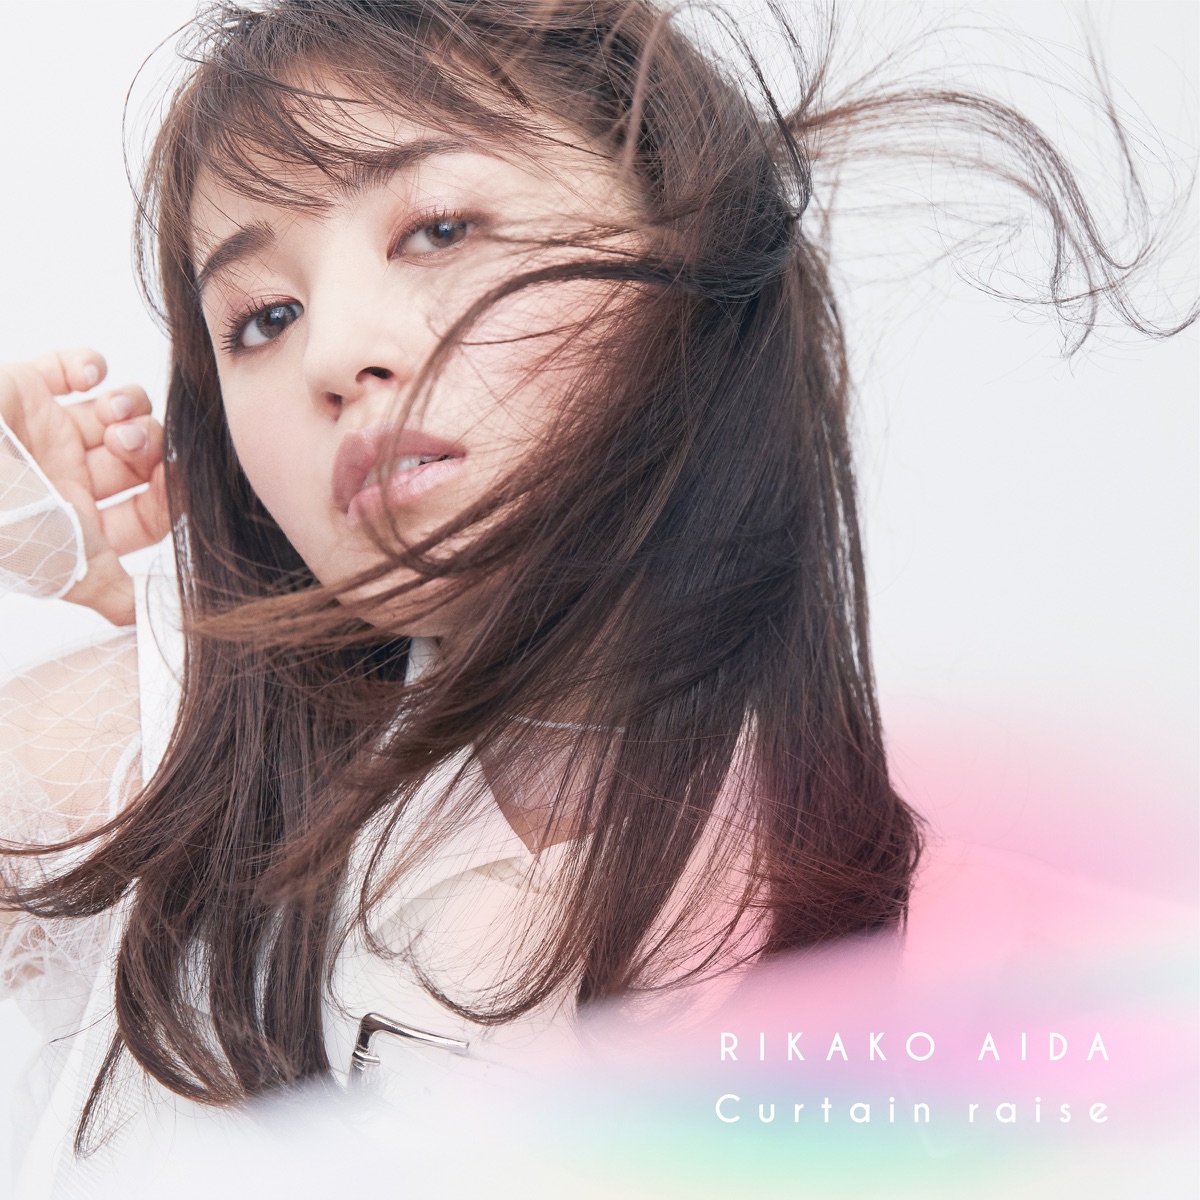 Cover art for『Rikako Aida - Tiered』from the release『Curtain raise』